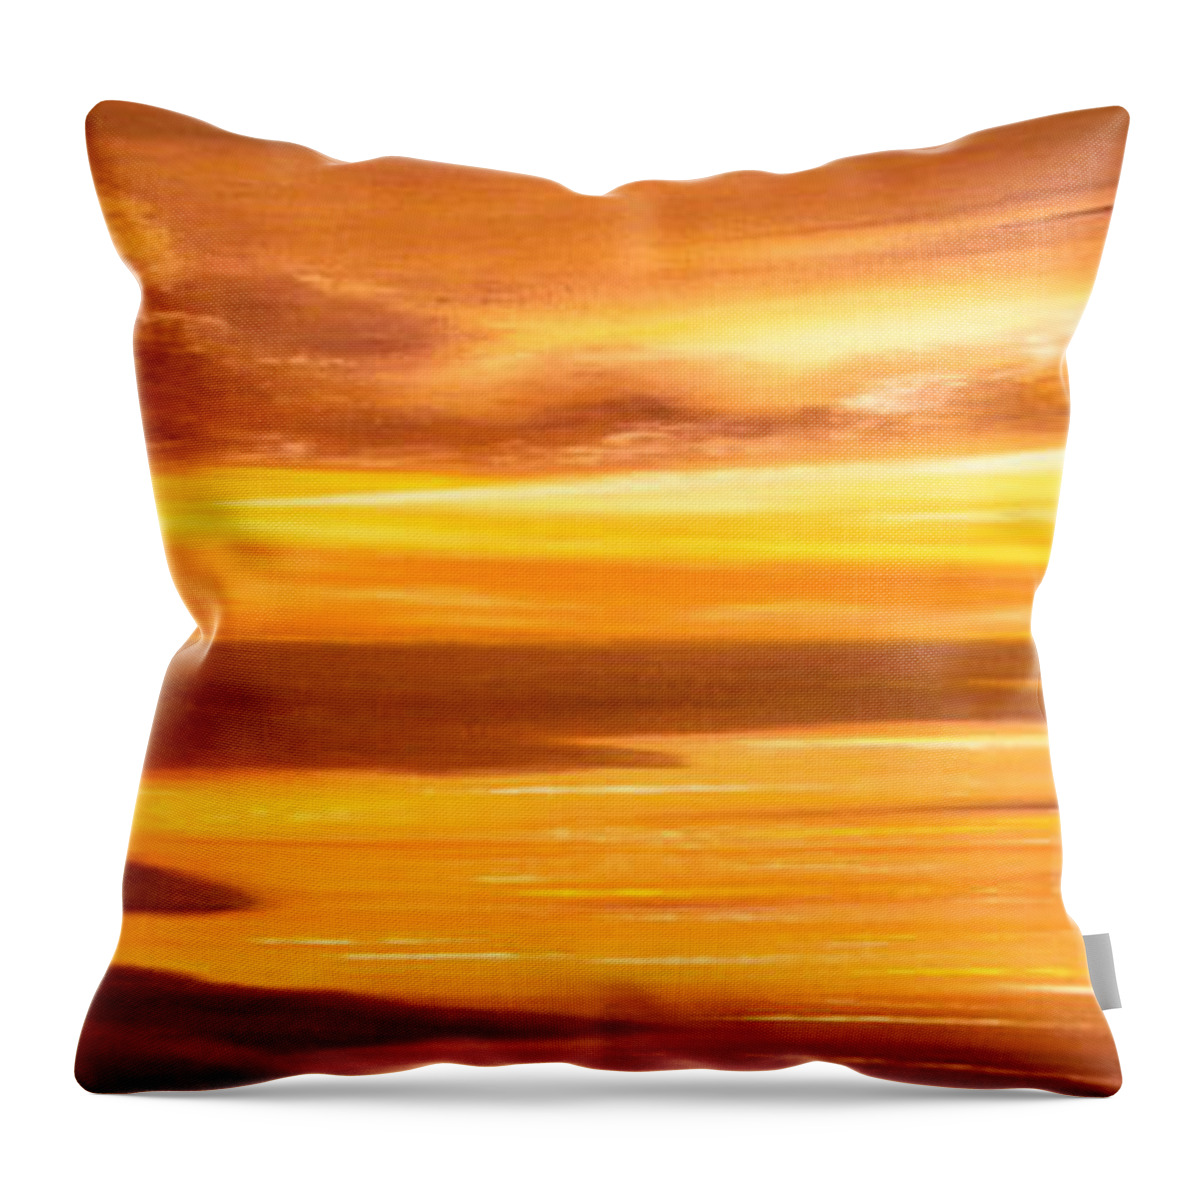 Sunsets Throw Pillow featuring the painting Golden Panoramic Sunset #2 by Gina De Gorna